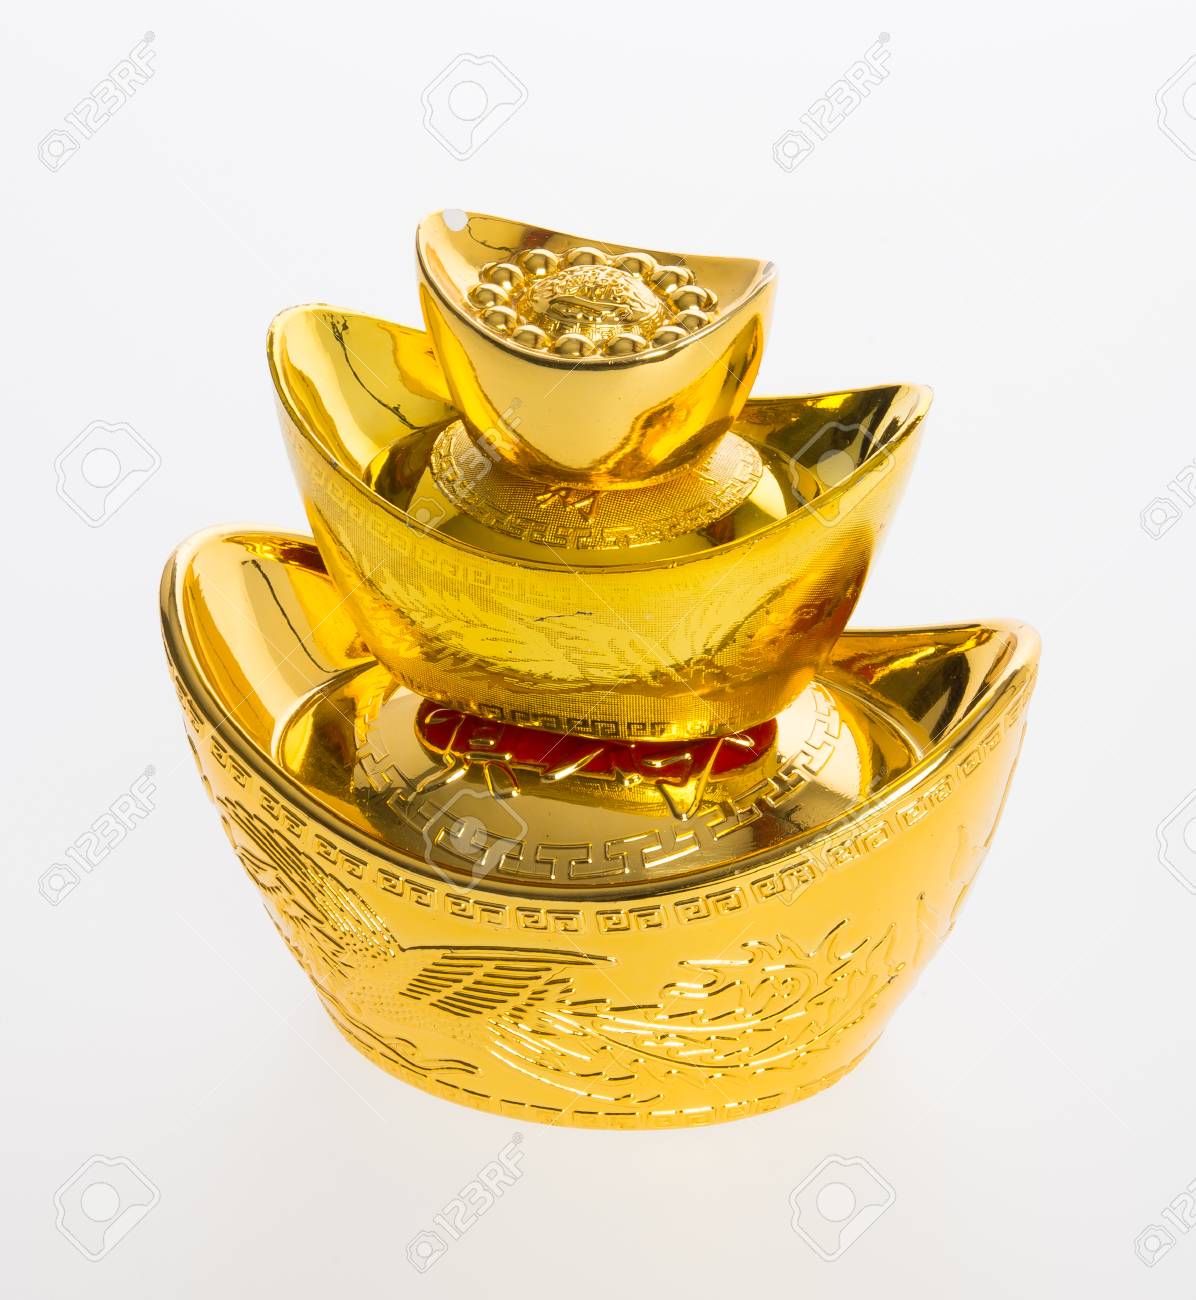 Gold Or Chinese Ingot Mean Symbols Of Wealth And Prosperity